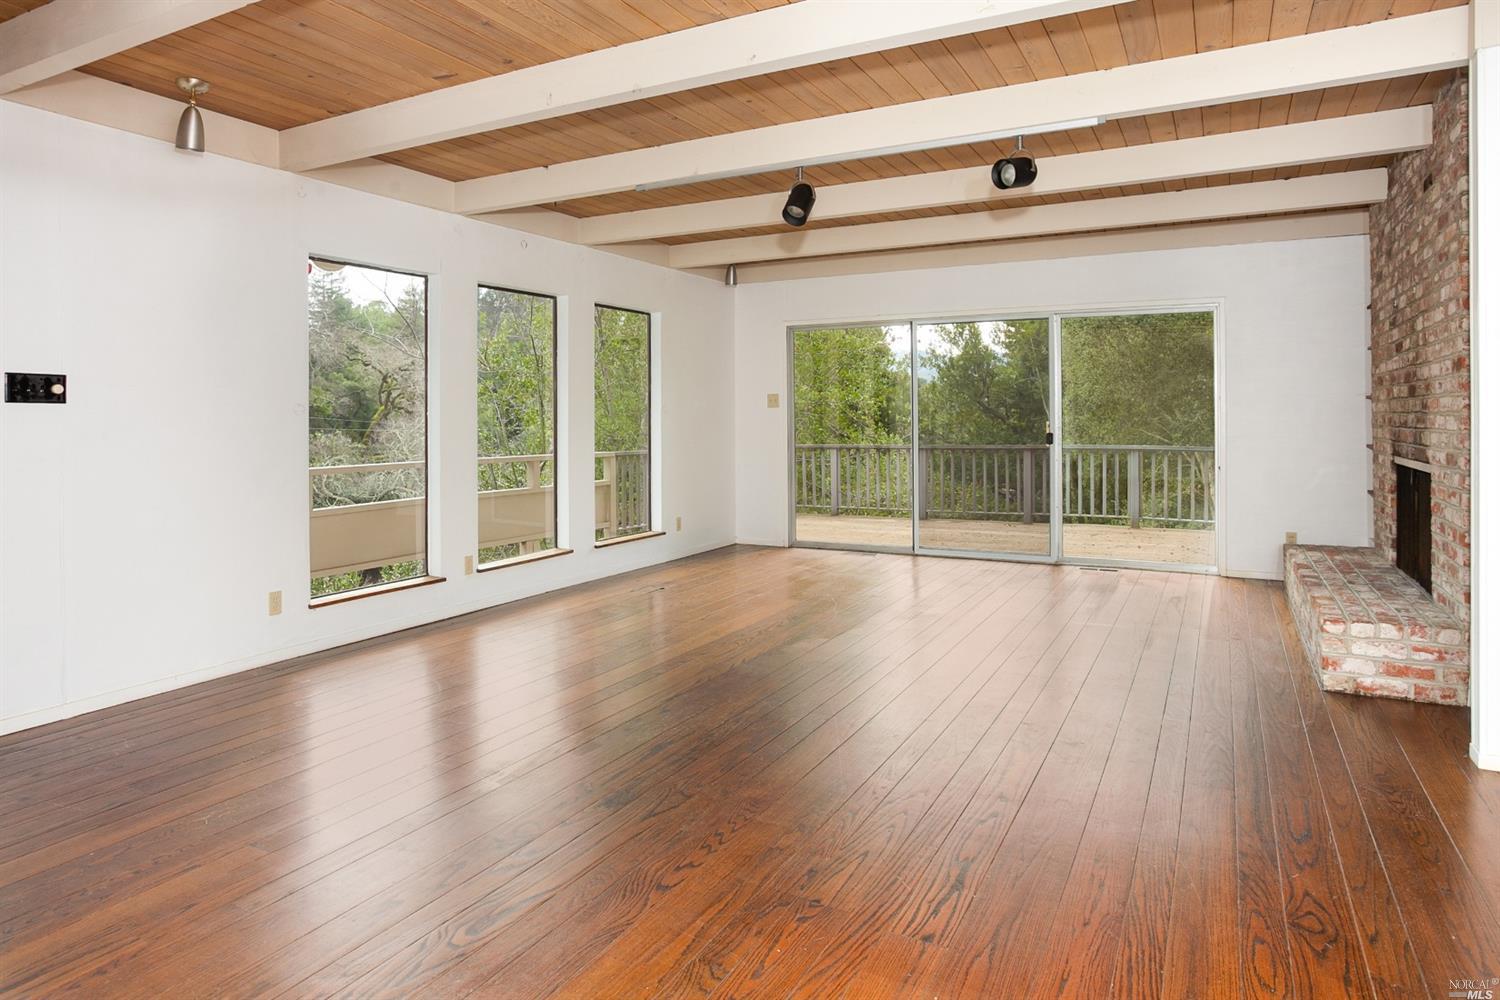 a view of wooden floor and windows in a room